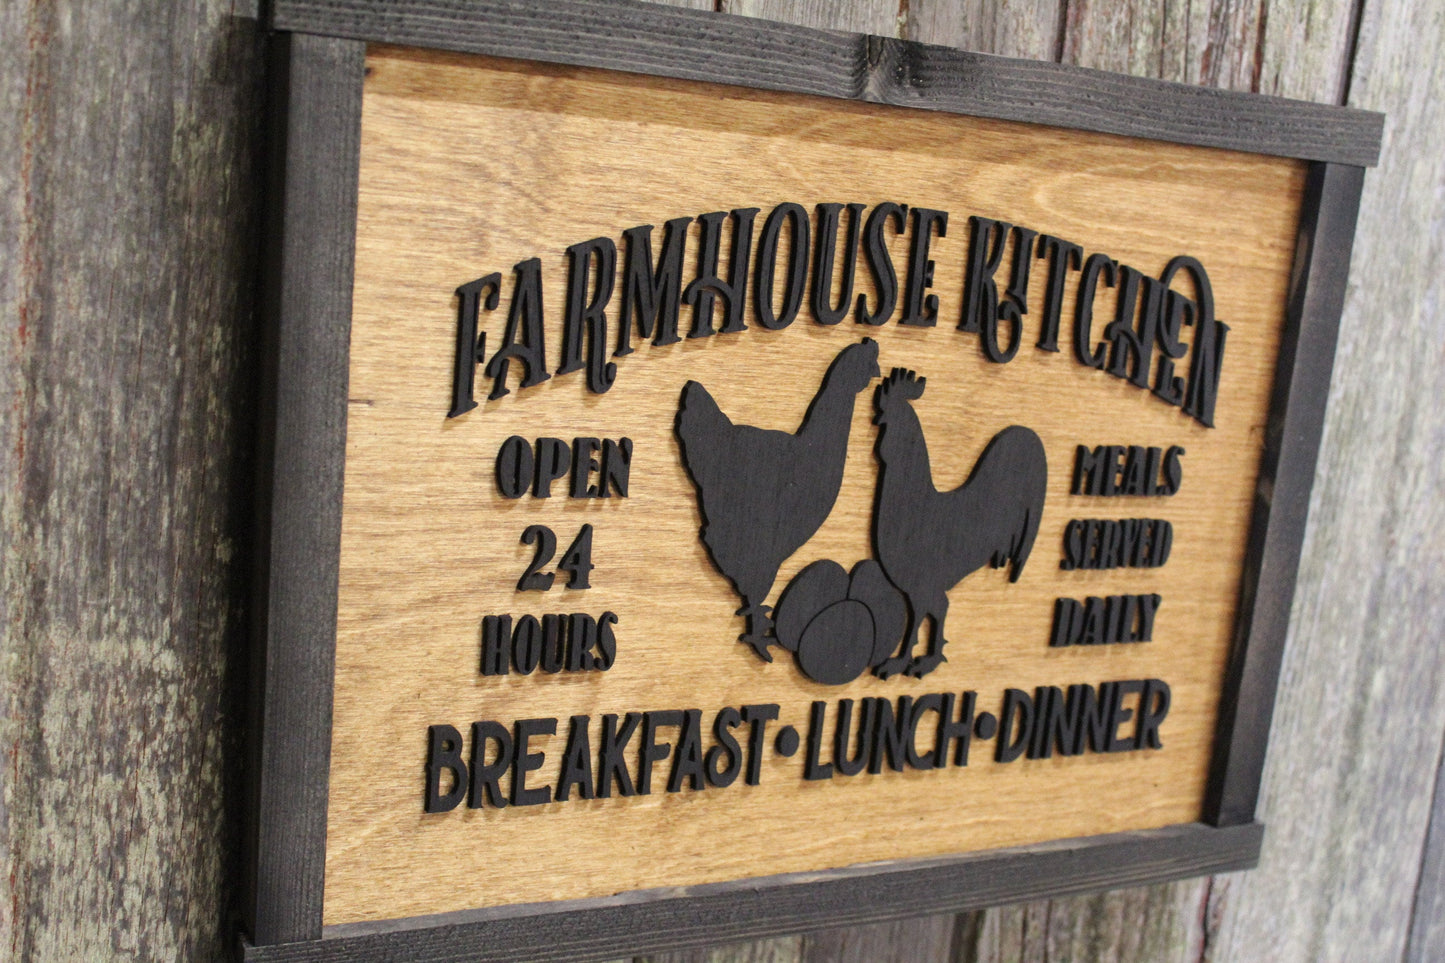 Farmhouse Menu Kitchen Wood Sign Chickens Open 24 Hours Meals Served Daily 3D Raised Text Framed Primitive Cabin Rustic Sign Chick Eggs